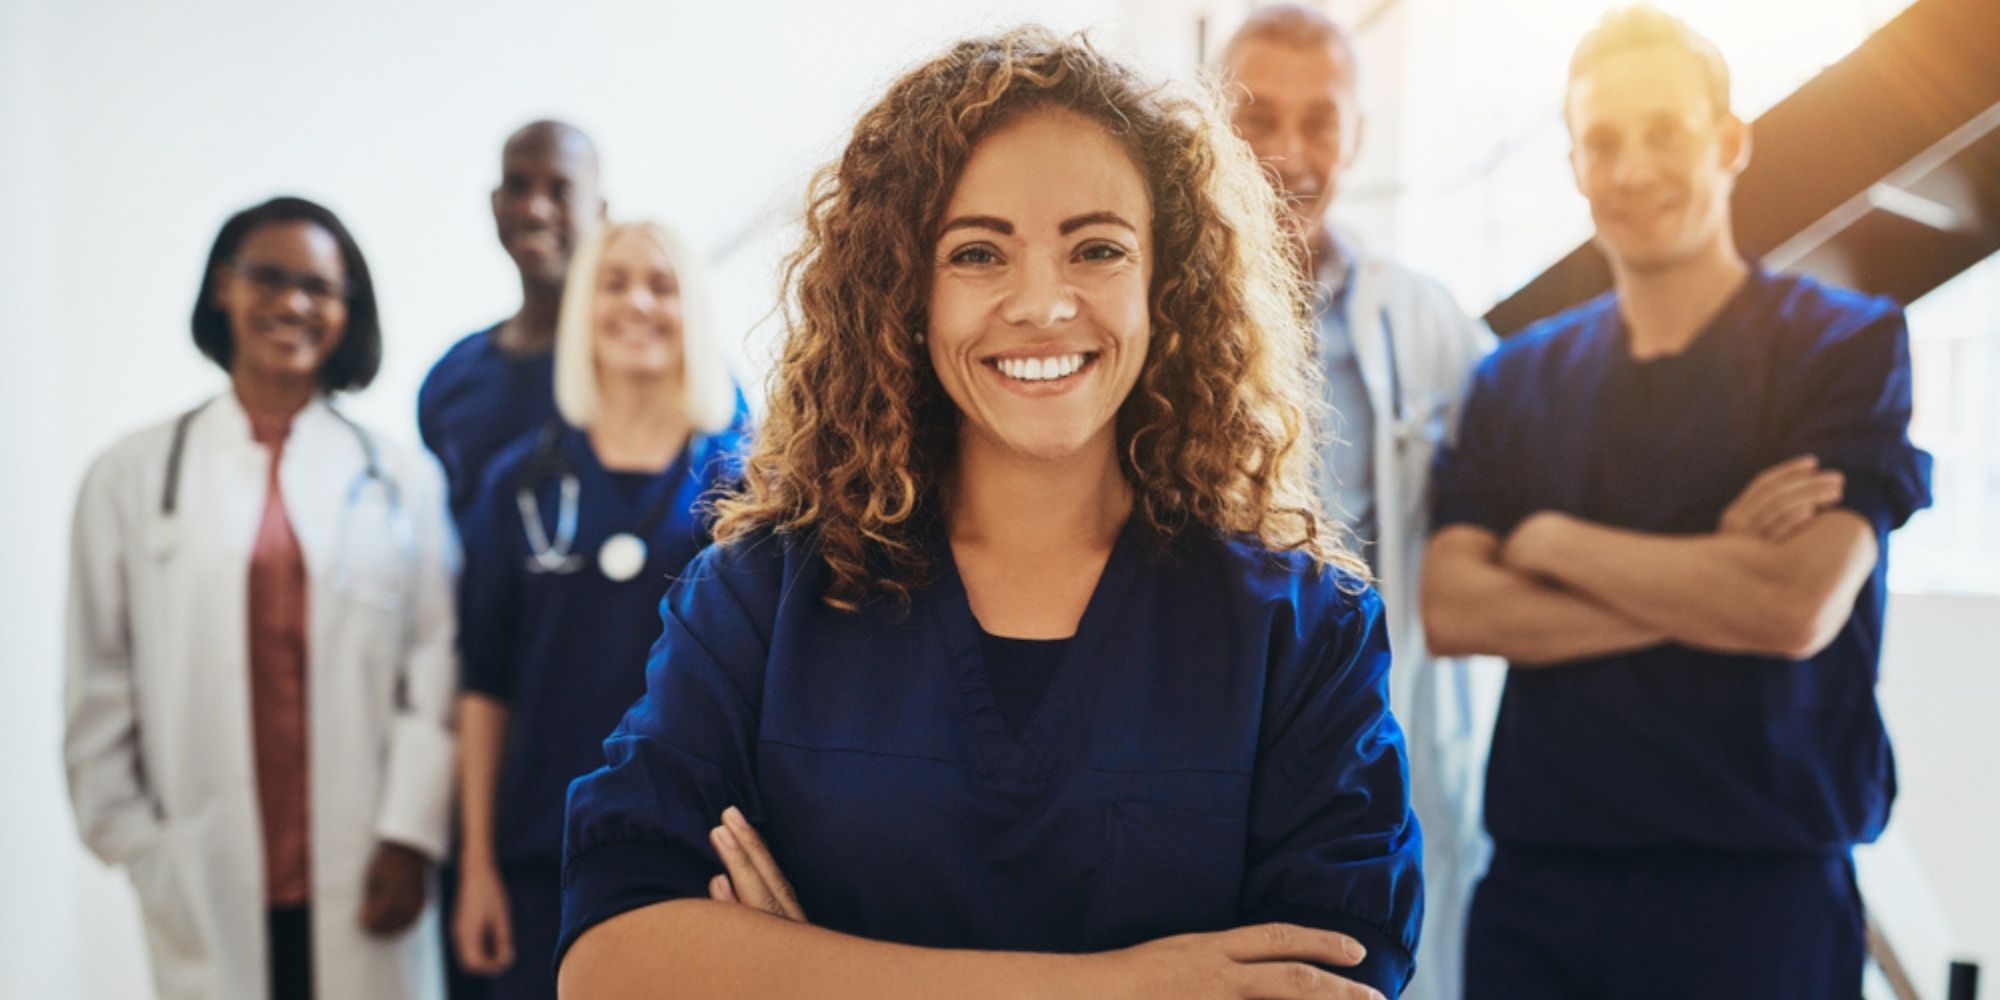 Young female doctor in navy scrubs smiling with arms crossed, other medical professionals lined up in a row behind her.